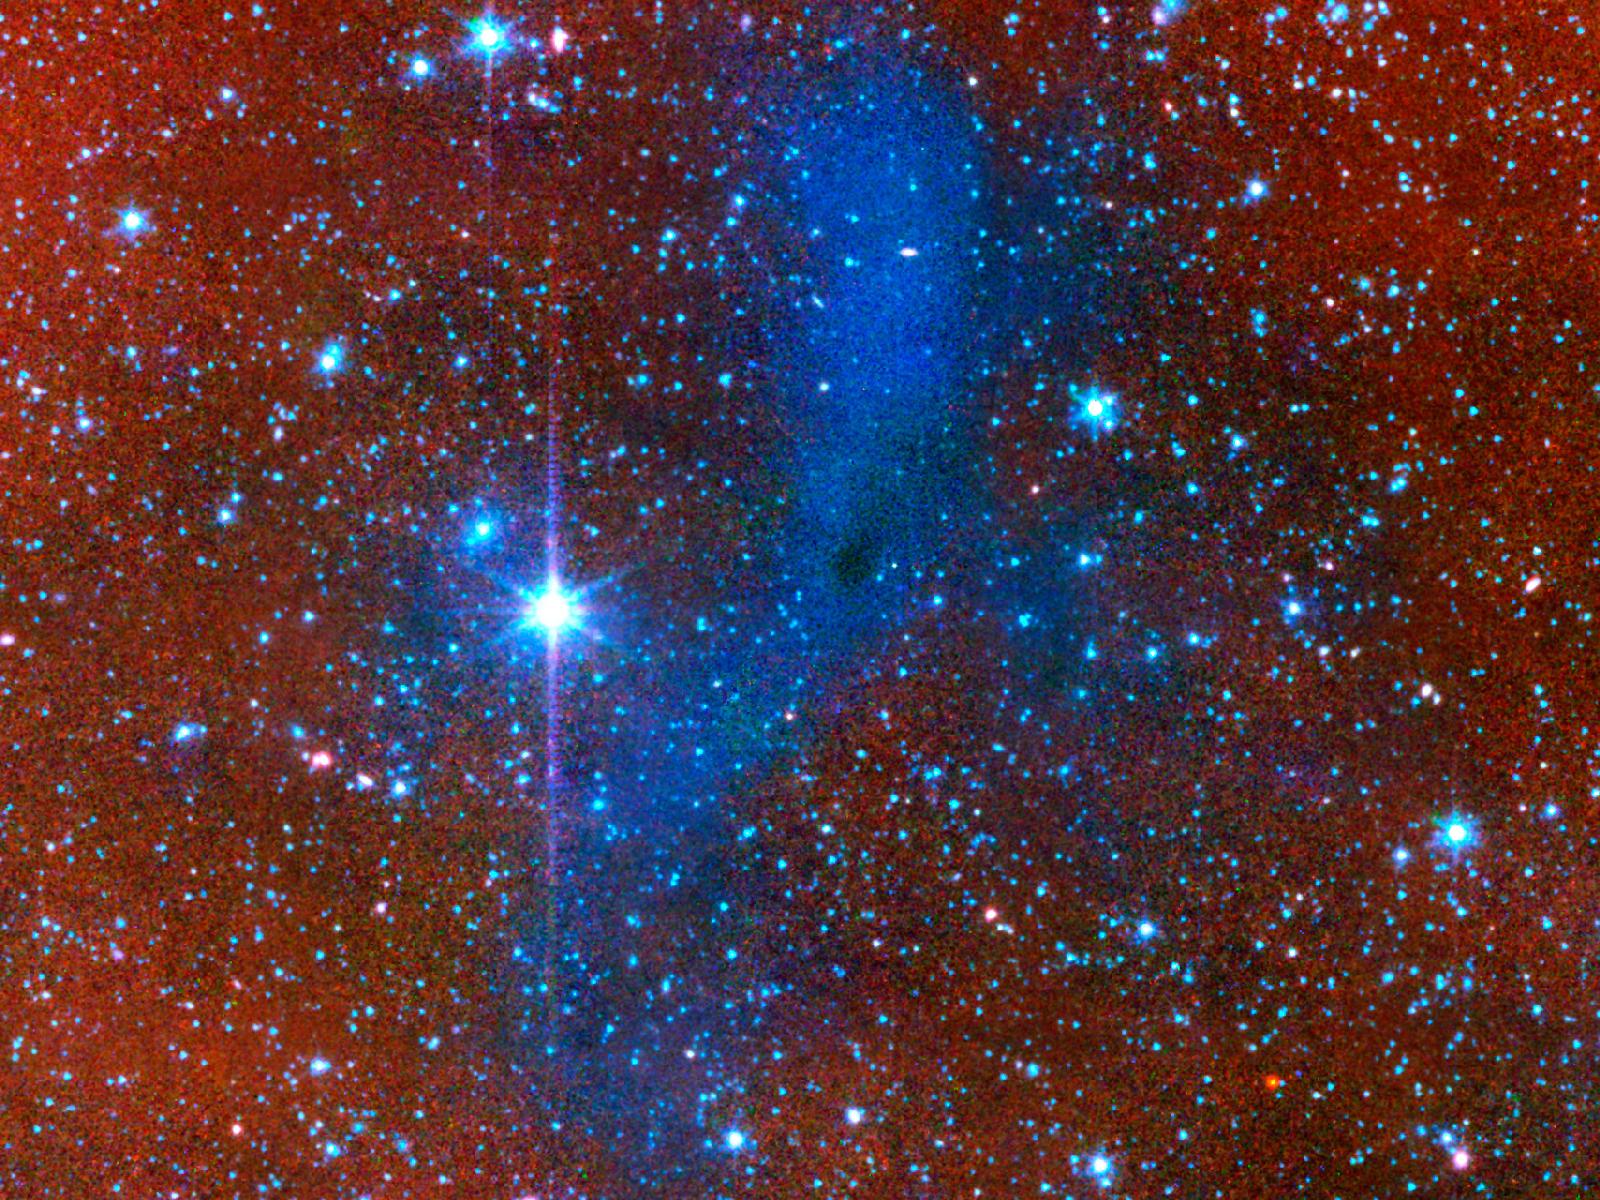 A Star's Birth Holds Early Clues to Life-Potential